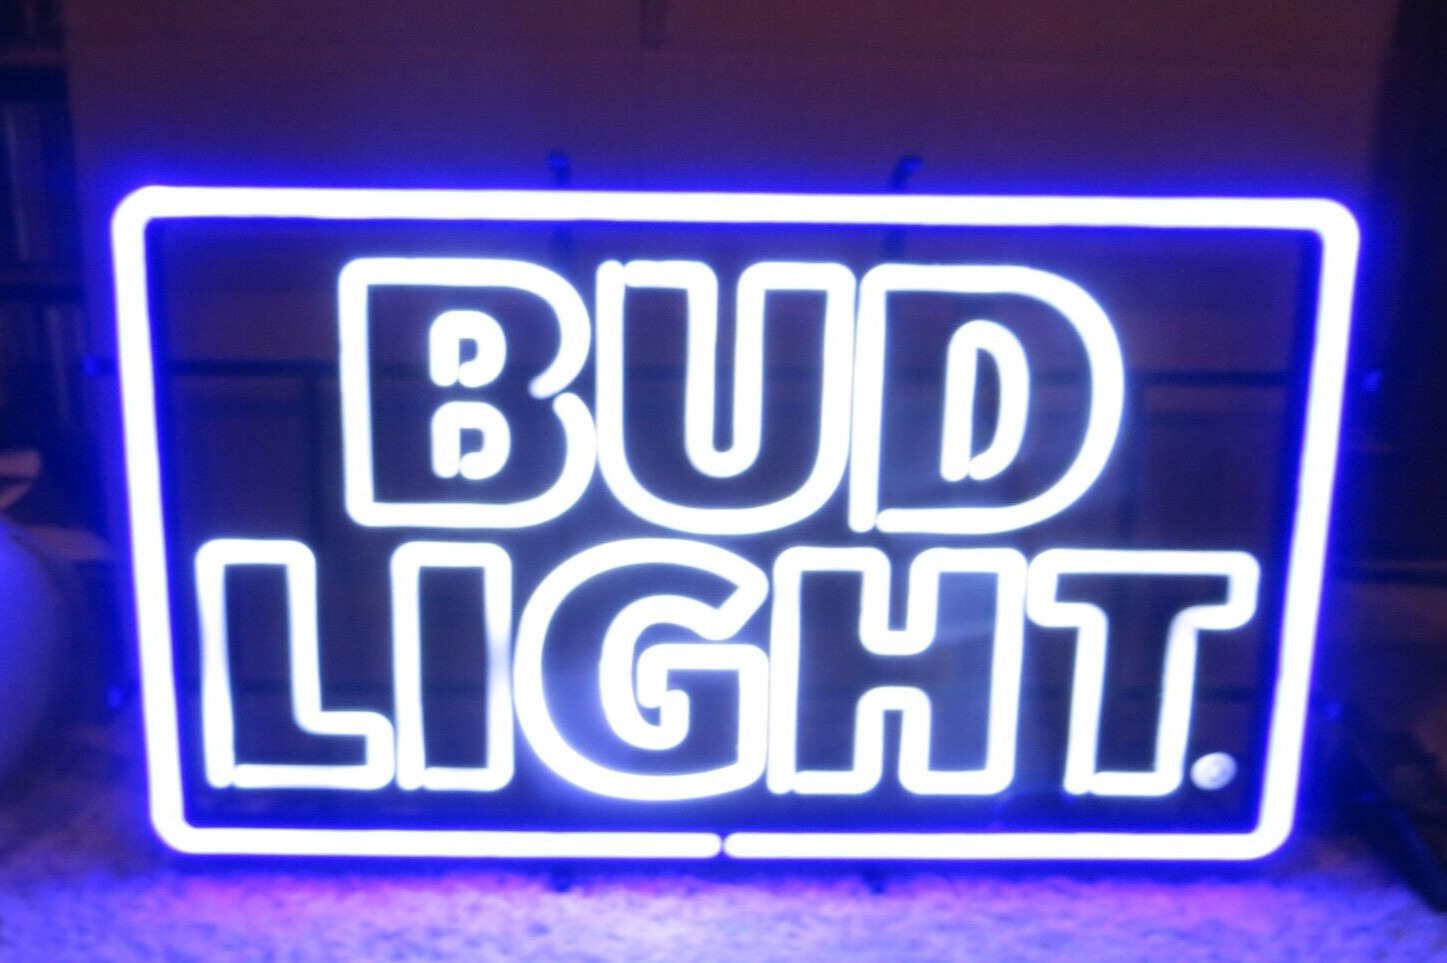 BUD LIGHT BEER ICONIC LOGO LED SIGN-OPTI NEON-BAR-LAGER-ALE-BUDWEISER-MAN CAVE